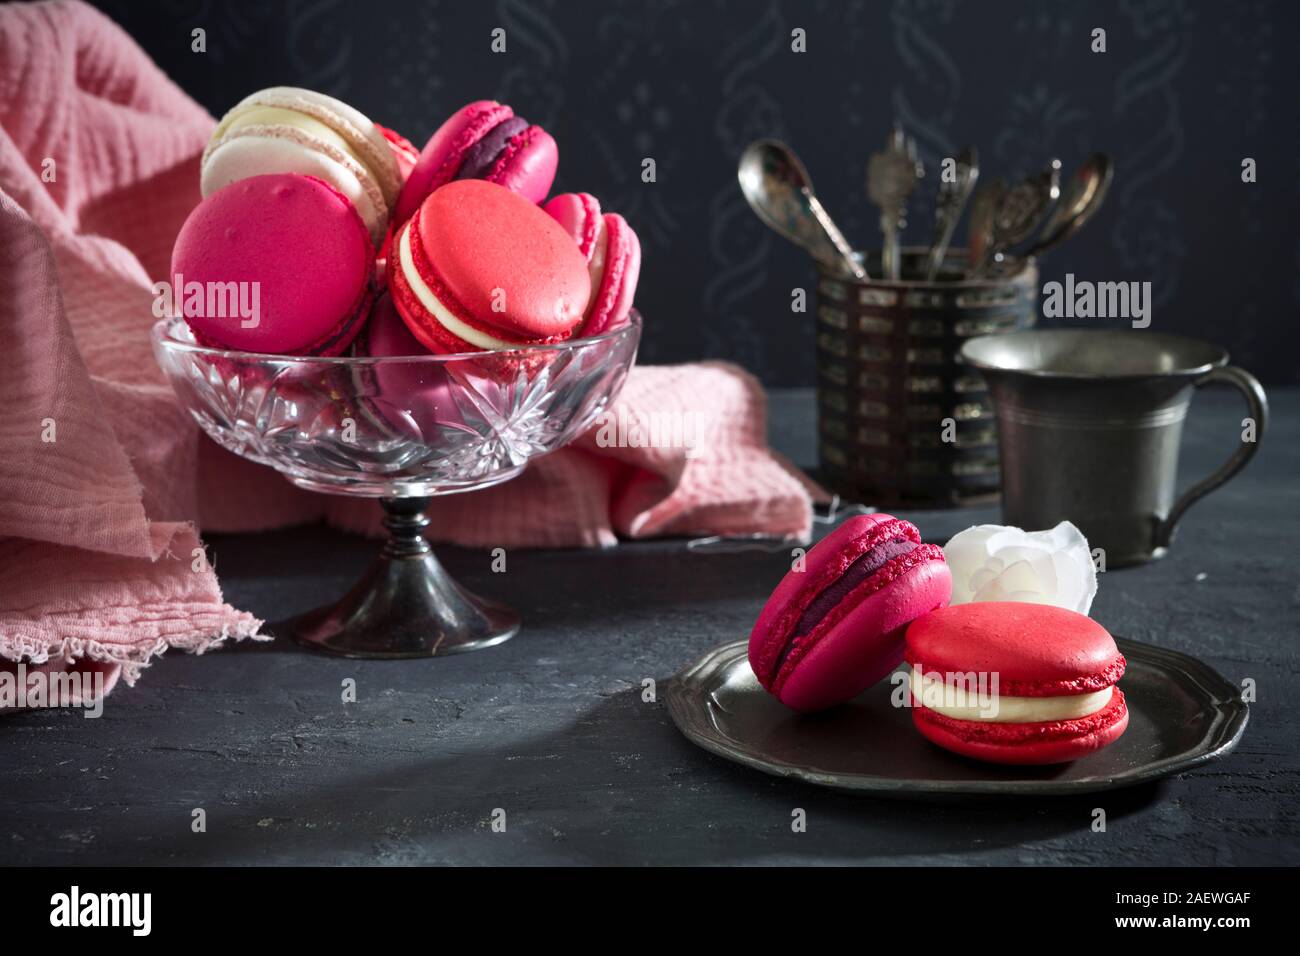 A collection of pink macarons. Stock Photo